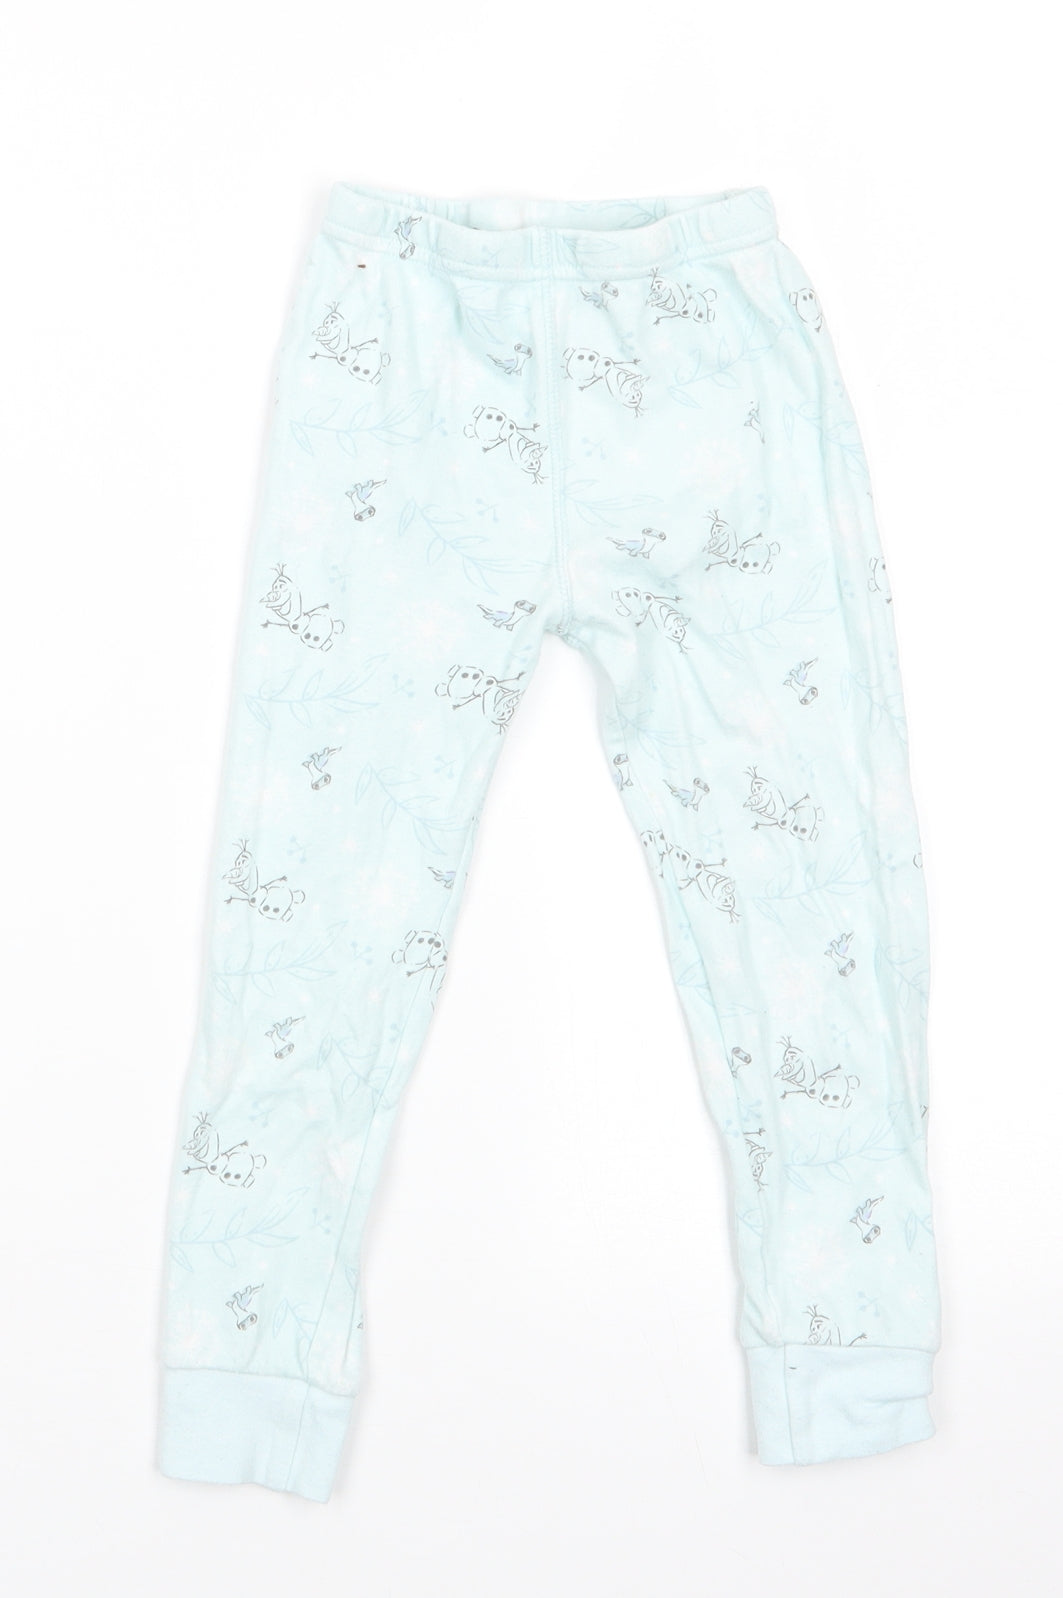 Frozen at George Girls Green Floral   Pyjama Pants Size 3-4 Years   - Mint green Olaf with leaf print